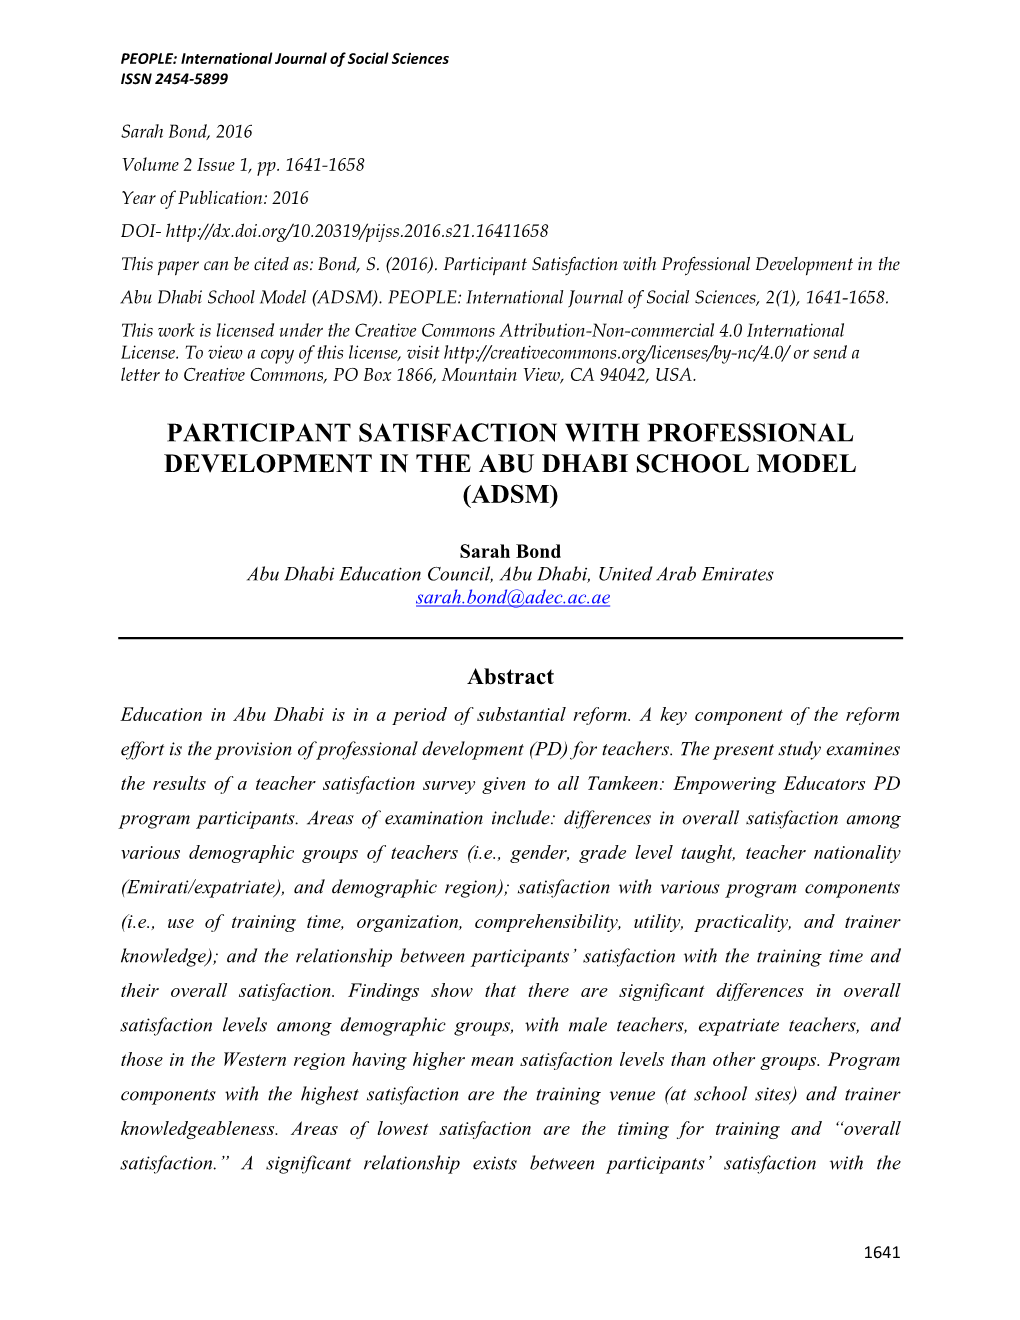 Participant Satisfaction with Professional Development in the Abu Dhabi School Model (ADSM)